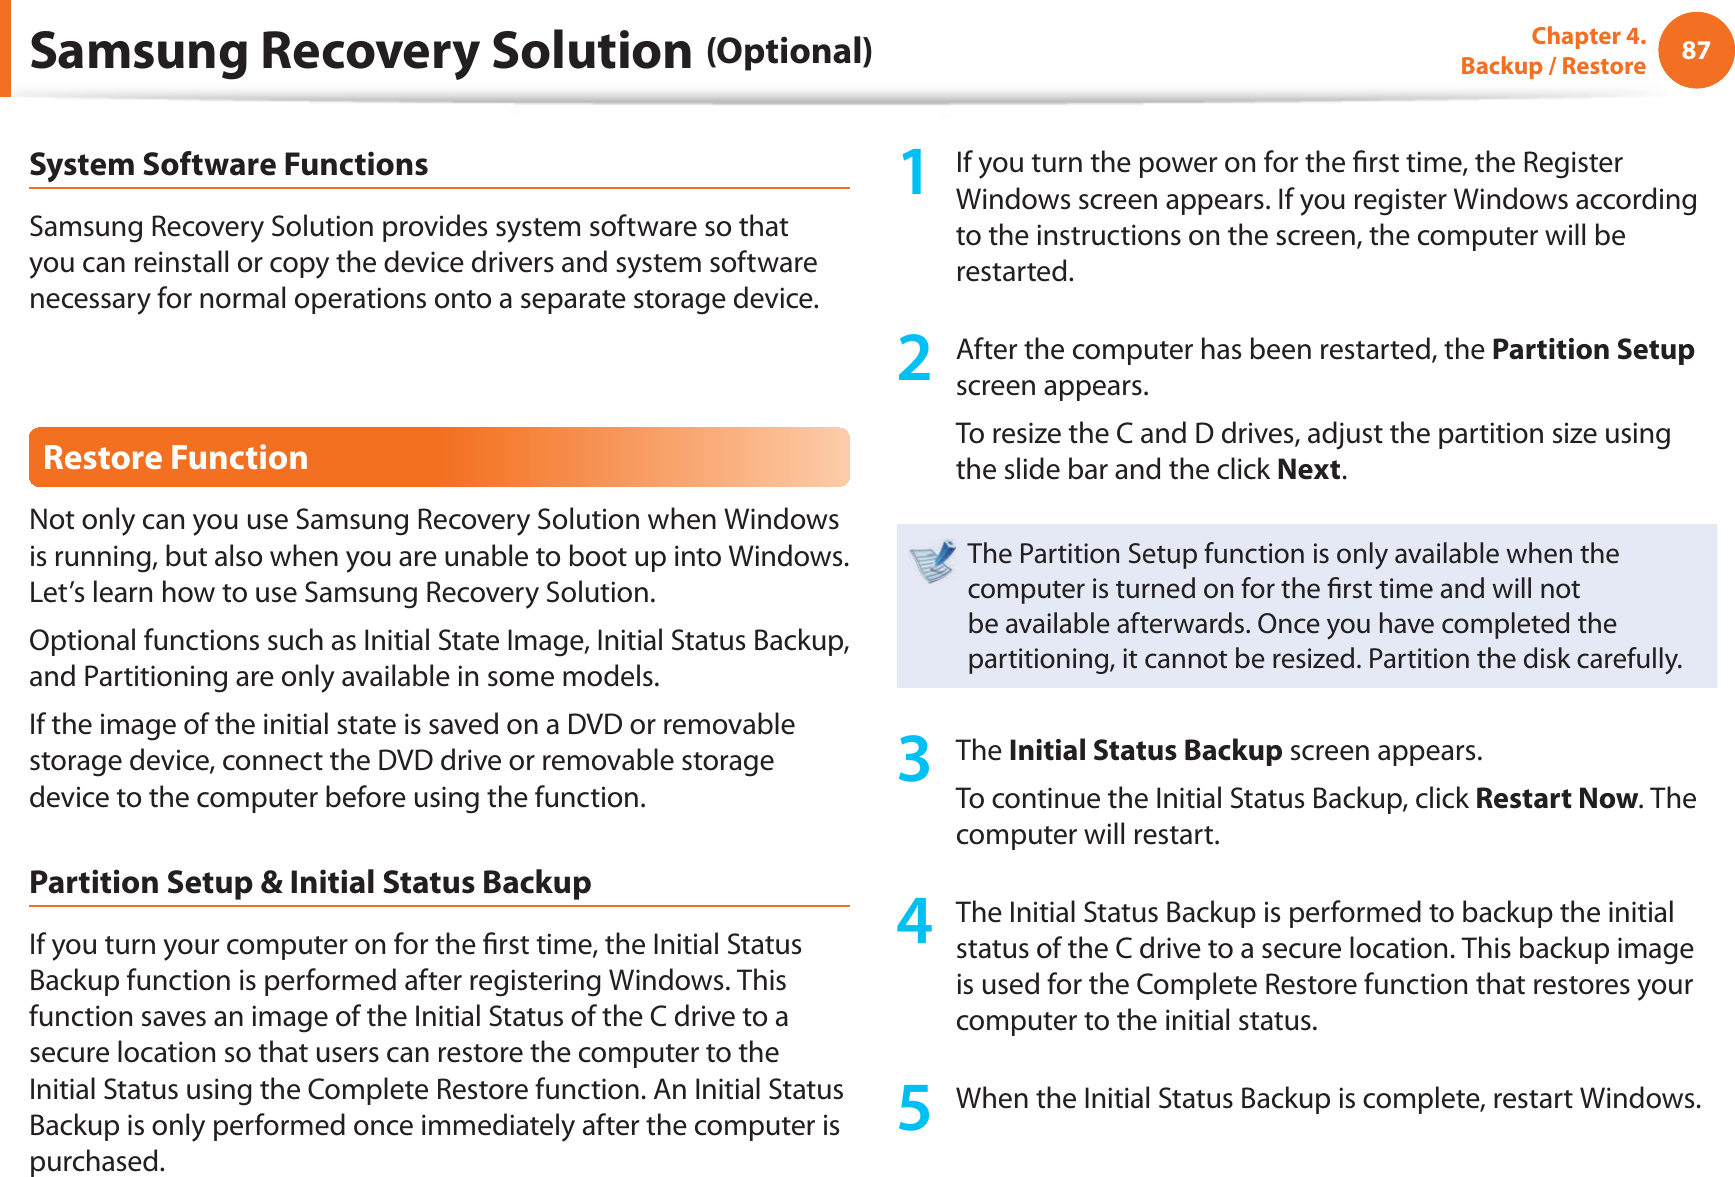 87Chapter 4.  Backup / RestoreSystem Software FunctionsSamsung Recovery Solution provides system software so that you can reinstall or copy the device drivers and system software necessary for normal operations onto a separate storage device.Restore FunctionNot only can you use Samsung Recovery Solution when Windows is running, but also when you are unable to boot up into Windows. Let’s learn how to use Samsung Recovery Solution.Optional functions such as Initial State Image, Initial Status Backup, and Partitioning are only available in some models.If the image of the initial state is saved on a DVD or removable storage device, connect the DVD drive or removable storage device to the computer before using the function.Partition Setup &amp; Initial Status BackupIf you turn your computer on for the ﬁ rst time, the Initial Status Backup function is performed after registering Windows. This function saves an image of the Initial Status of the C drive to a secure location so that users can restore the computer to the Initial Status using the Complete Restore function. An Initial Status Backup is only performed once immediately after the computer is purchased.1  If you turn the power on for the ﬁ rst time, the Register Windows screen appears. If you register Windows according to the instructions on the screen, the computer will be restarted.2  After the computer has been restarted, the Partition Setup screen appears. To resize the C and D drives, adjust the partition size using the slide bar and the click Next.The Partition Setup function is only available when the computer is turned on for the ﬁ rst time and will not be available afterwards. Once you have completed the partitioning, it cannot be resized. Partition the disk carefully.3 The Initial Status Backup screen appears. To continue the Initial Status Backup, click Restart Now. The computer will restart.4  The Initial Status Backup is performed to backup the initial status of the C drive to a secure location. This backup image is used for the Complete Restore function that restores your computer to the initial status.5  When the Initial Status Backup is complete, restart Windows.Samsung Recovery Solution (Optional)